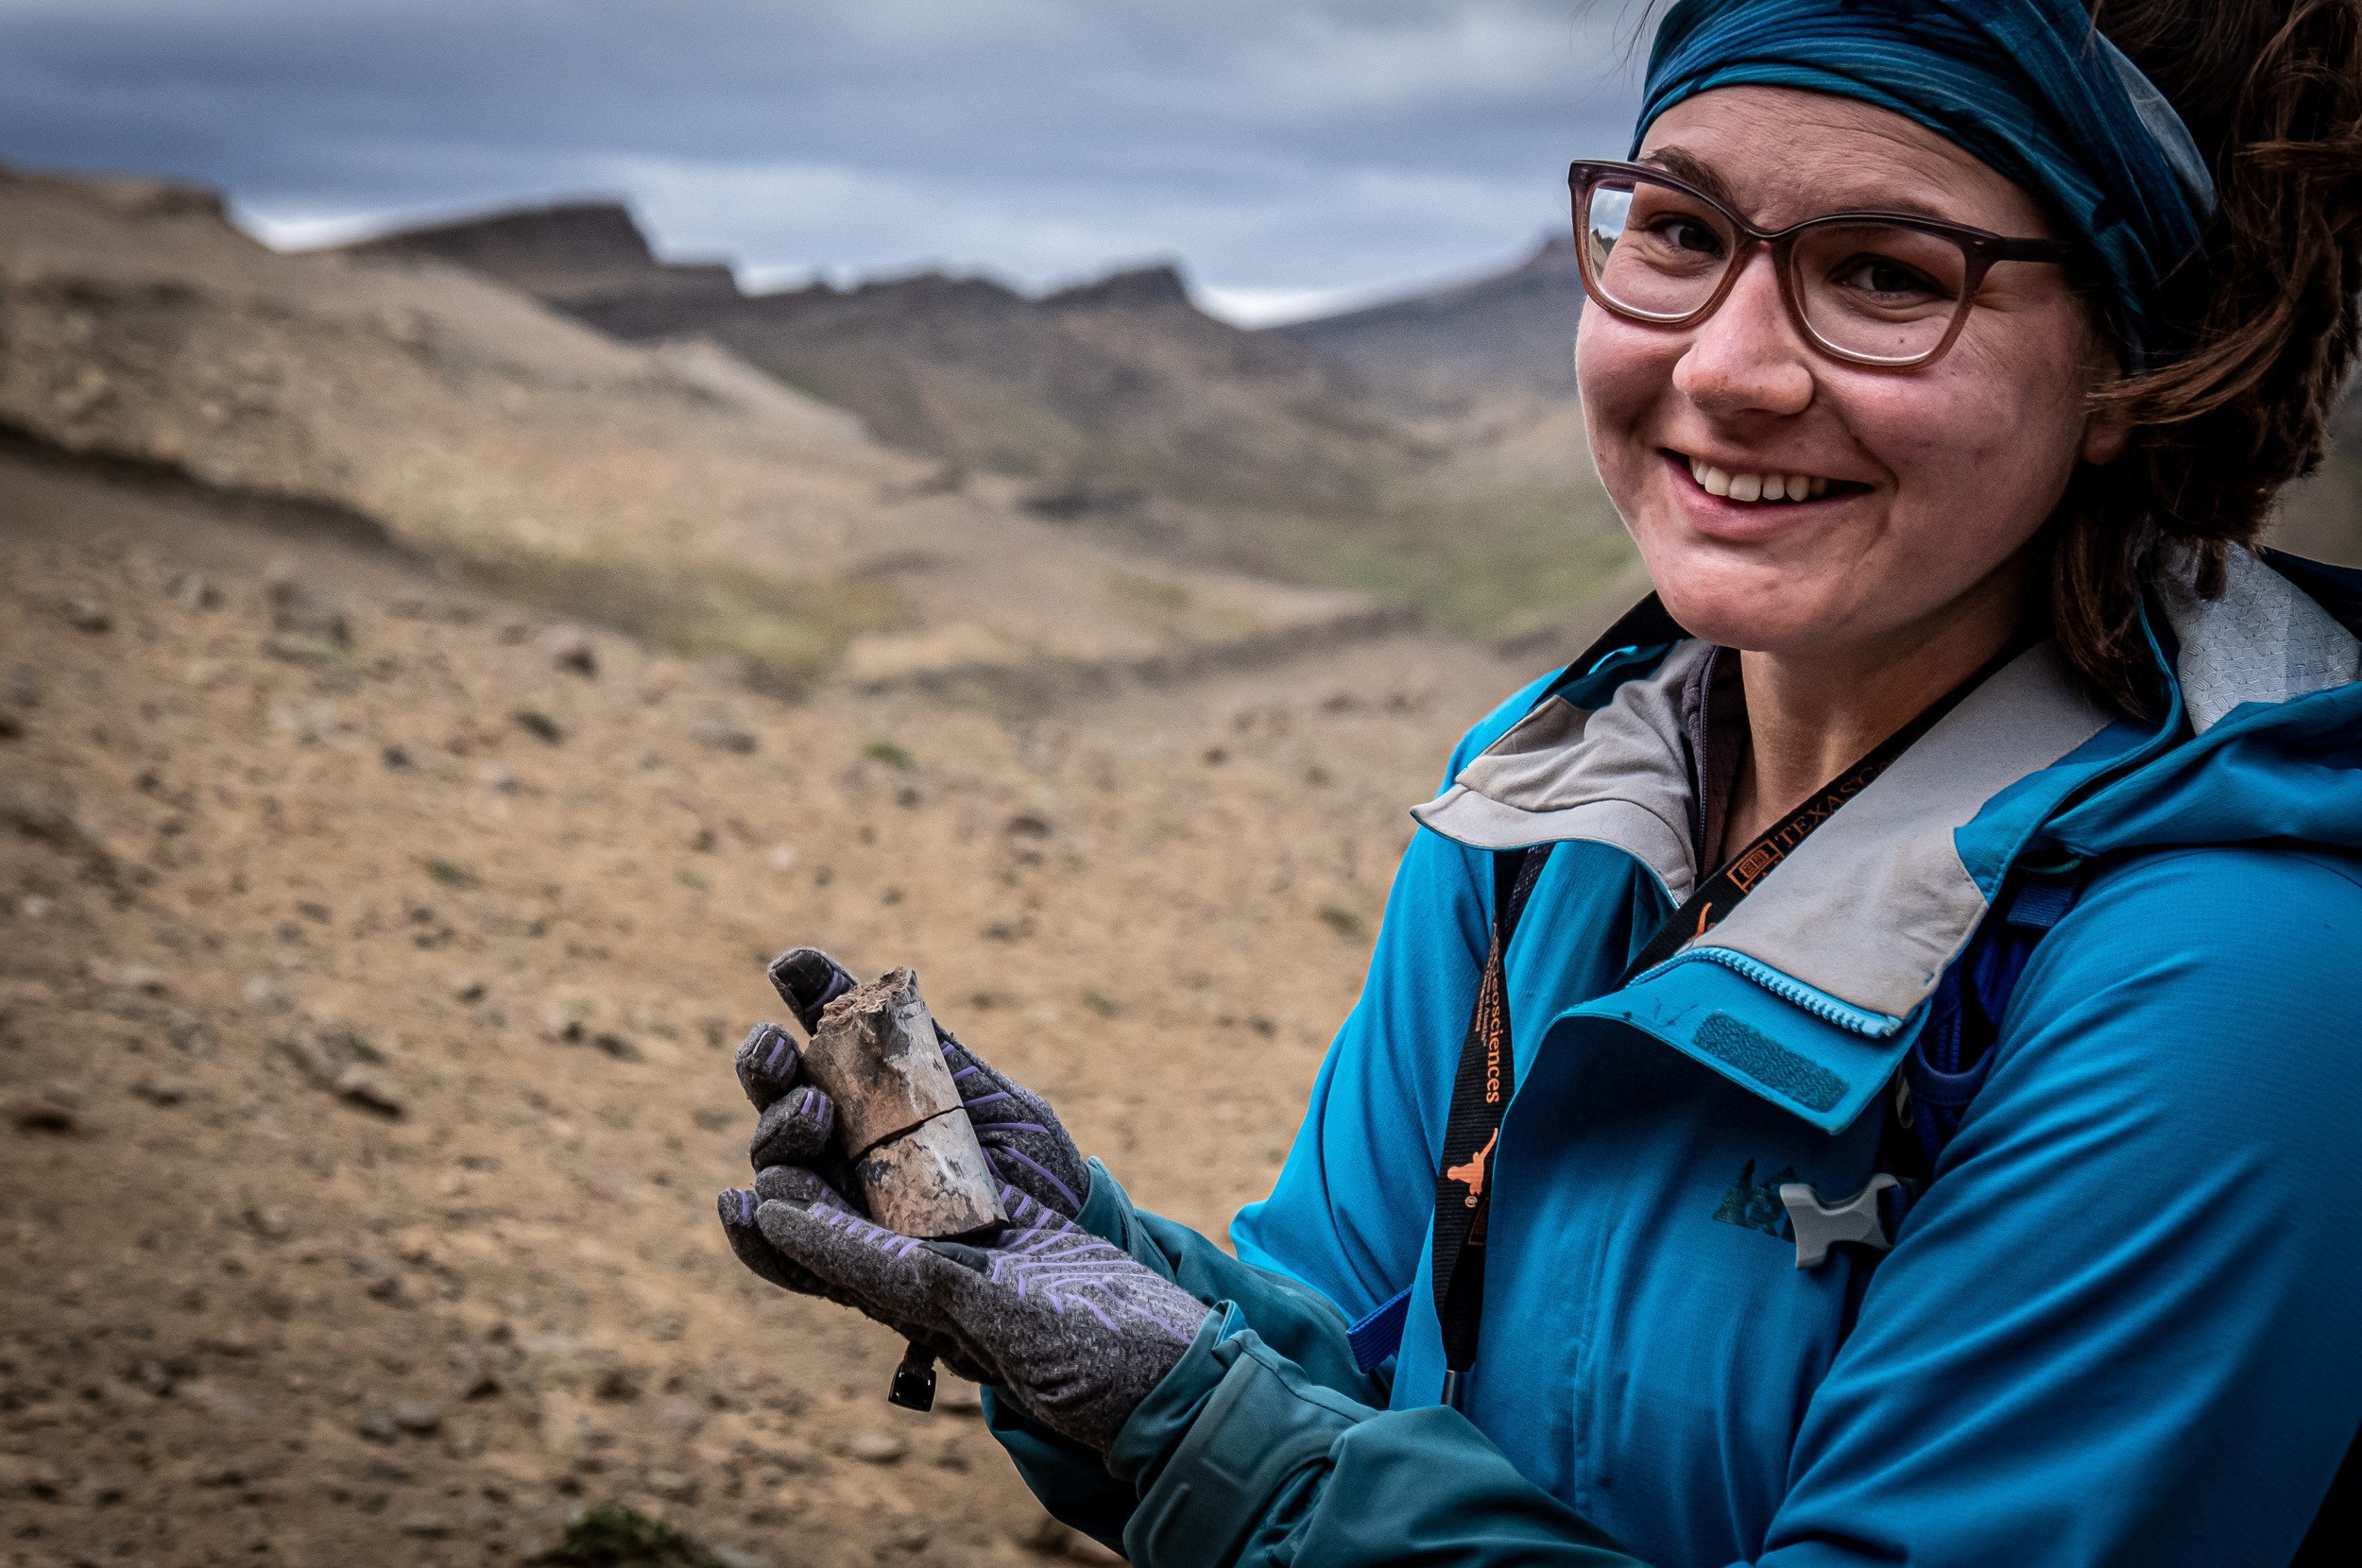 A woman holds a fossil at the area where scientists discovered megaraptor fossils at 'Guido' hill in the Chilean Patagonia area, close to Torres del Paine park, in Magallanes and Antarctic region, Chile in this undated handout photo provided by the Instituto Chileno Antartico on January 16, 2023. Photo: Reuters